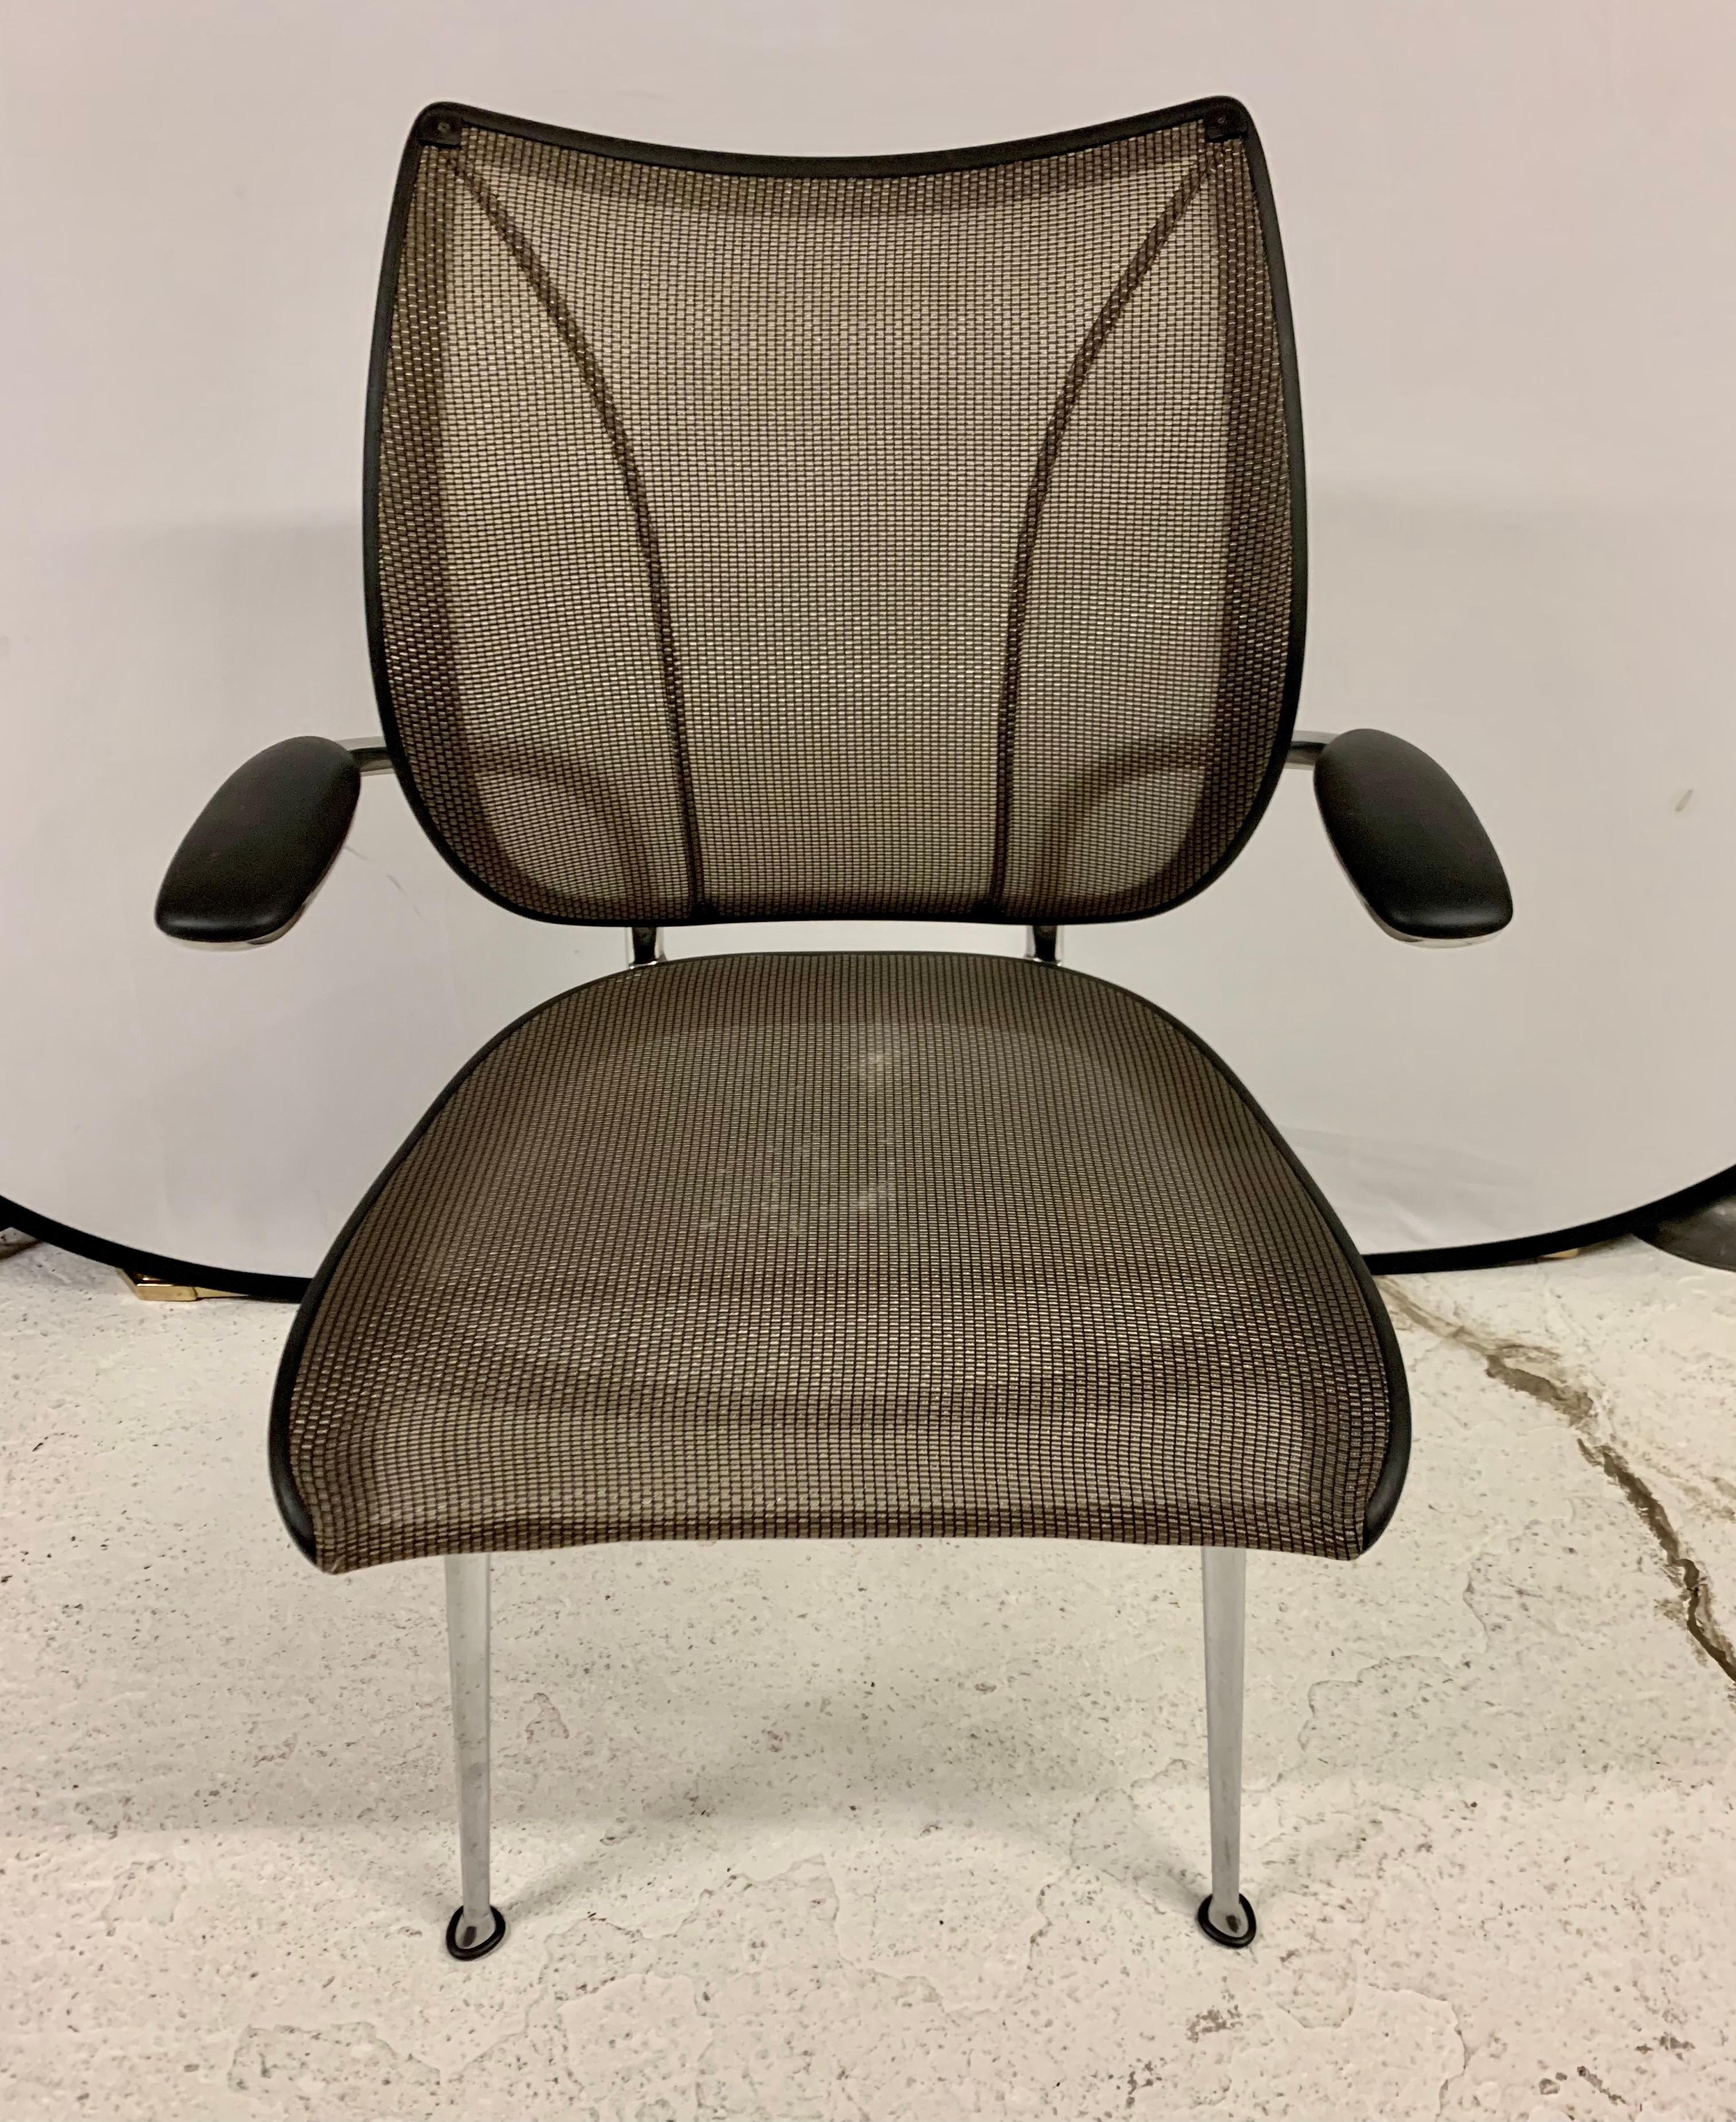 Iconic, Humanscale Liberty side chairs a Best of NeoCon Gold Award winner offers beauty, performance and unprecedented. Designed to complement the styling and features of the Liberty task and conference chair the Set of Humanscale Liberty side